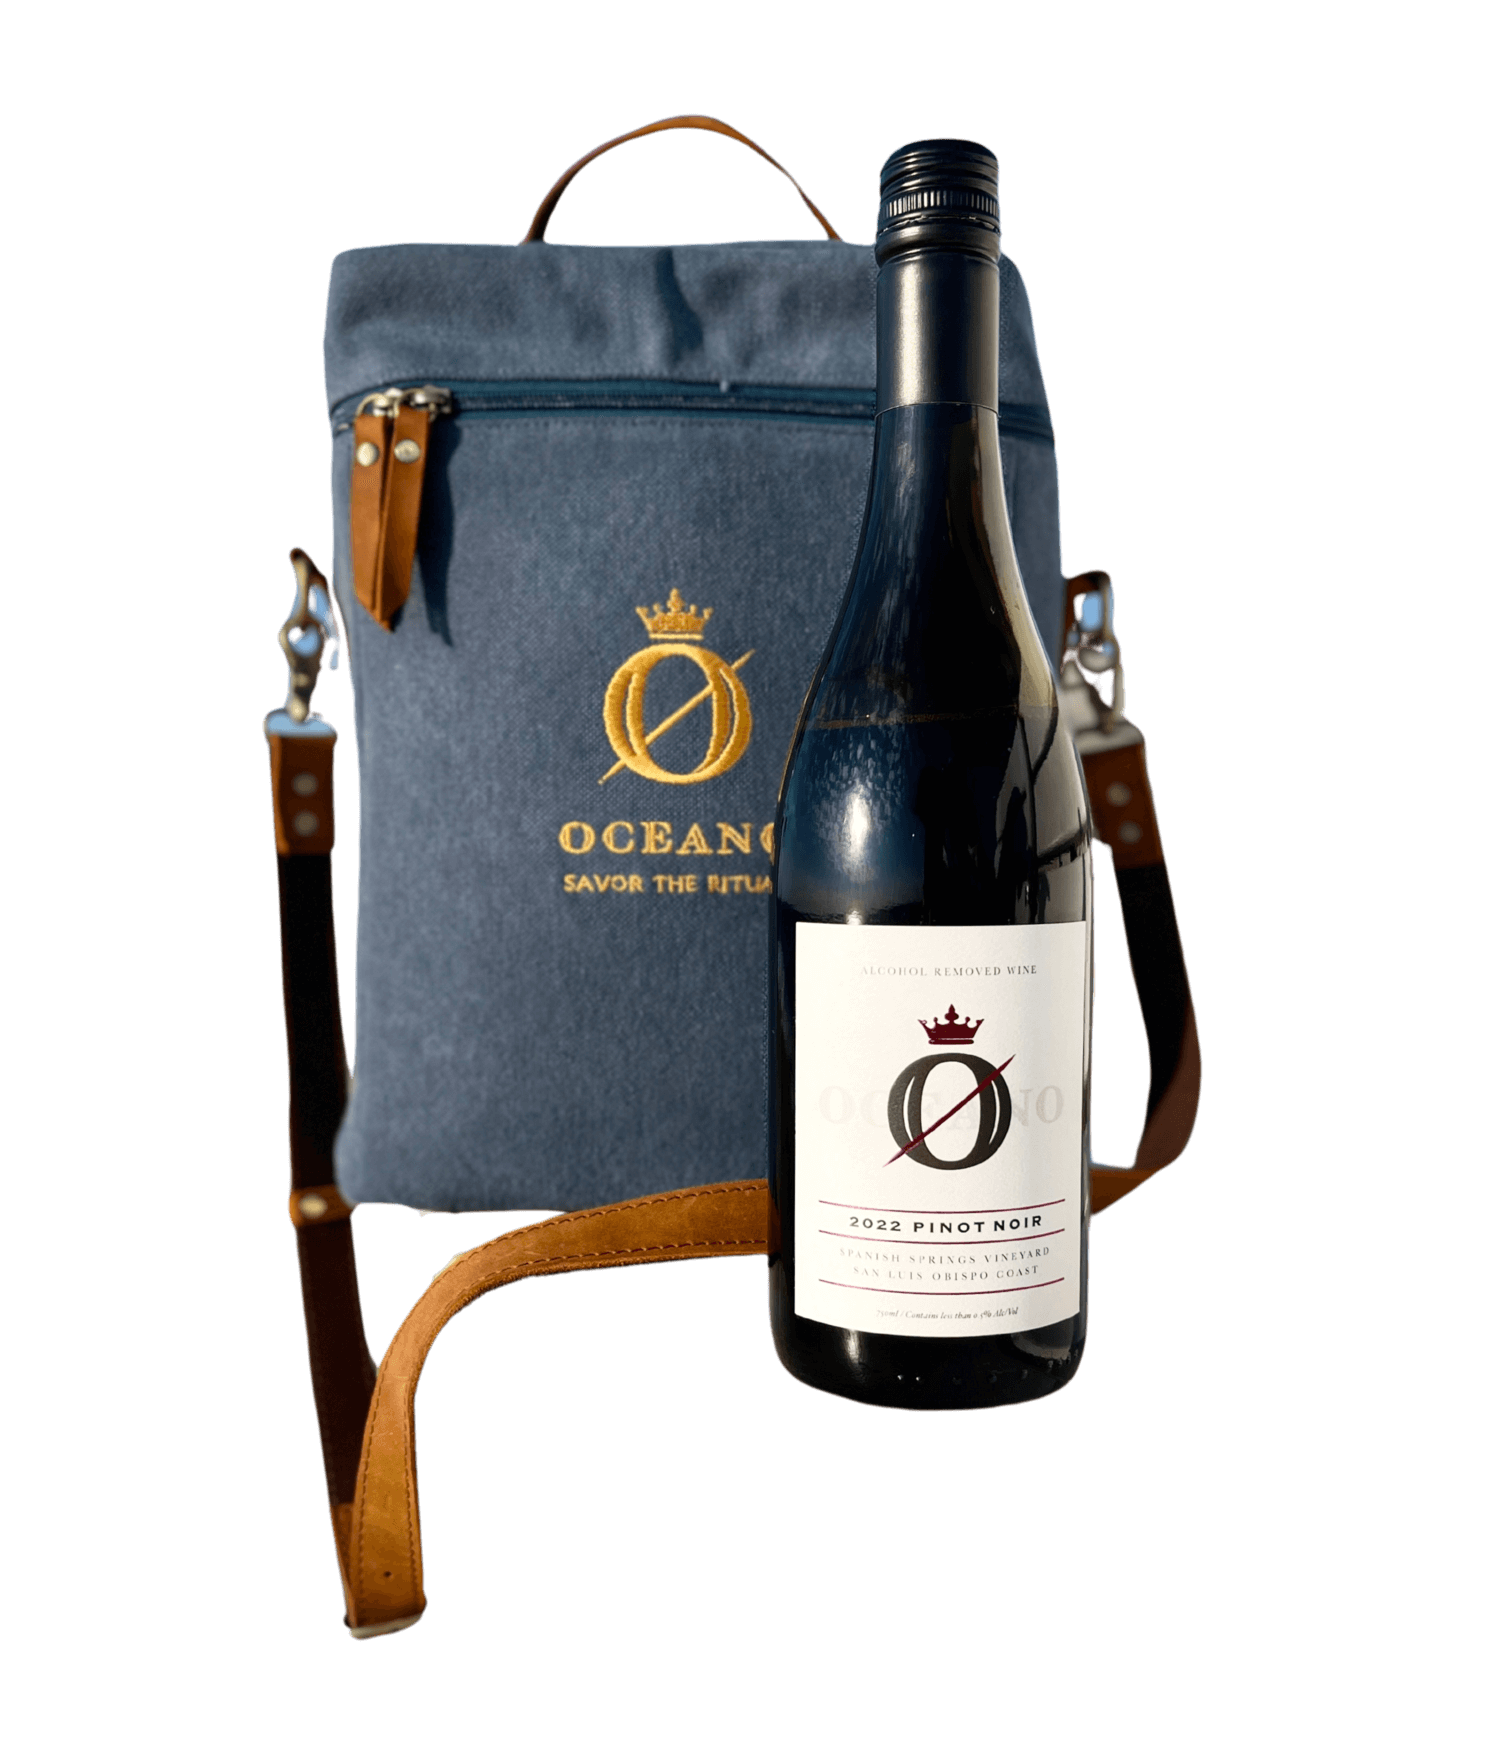 A denim and leather insulated wine tote bag that is big enough for two bottles of wine.